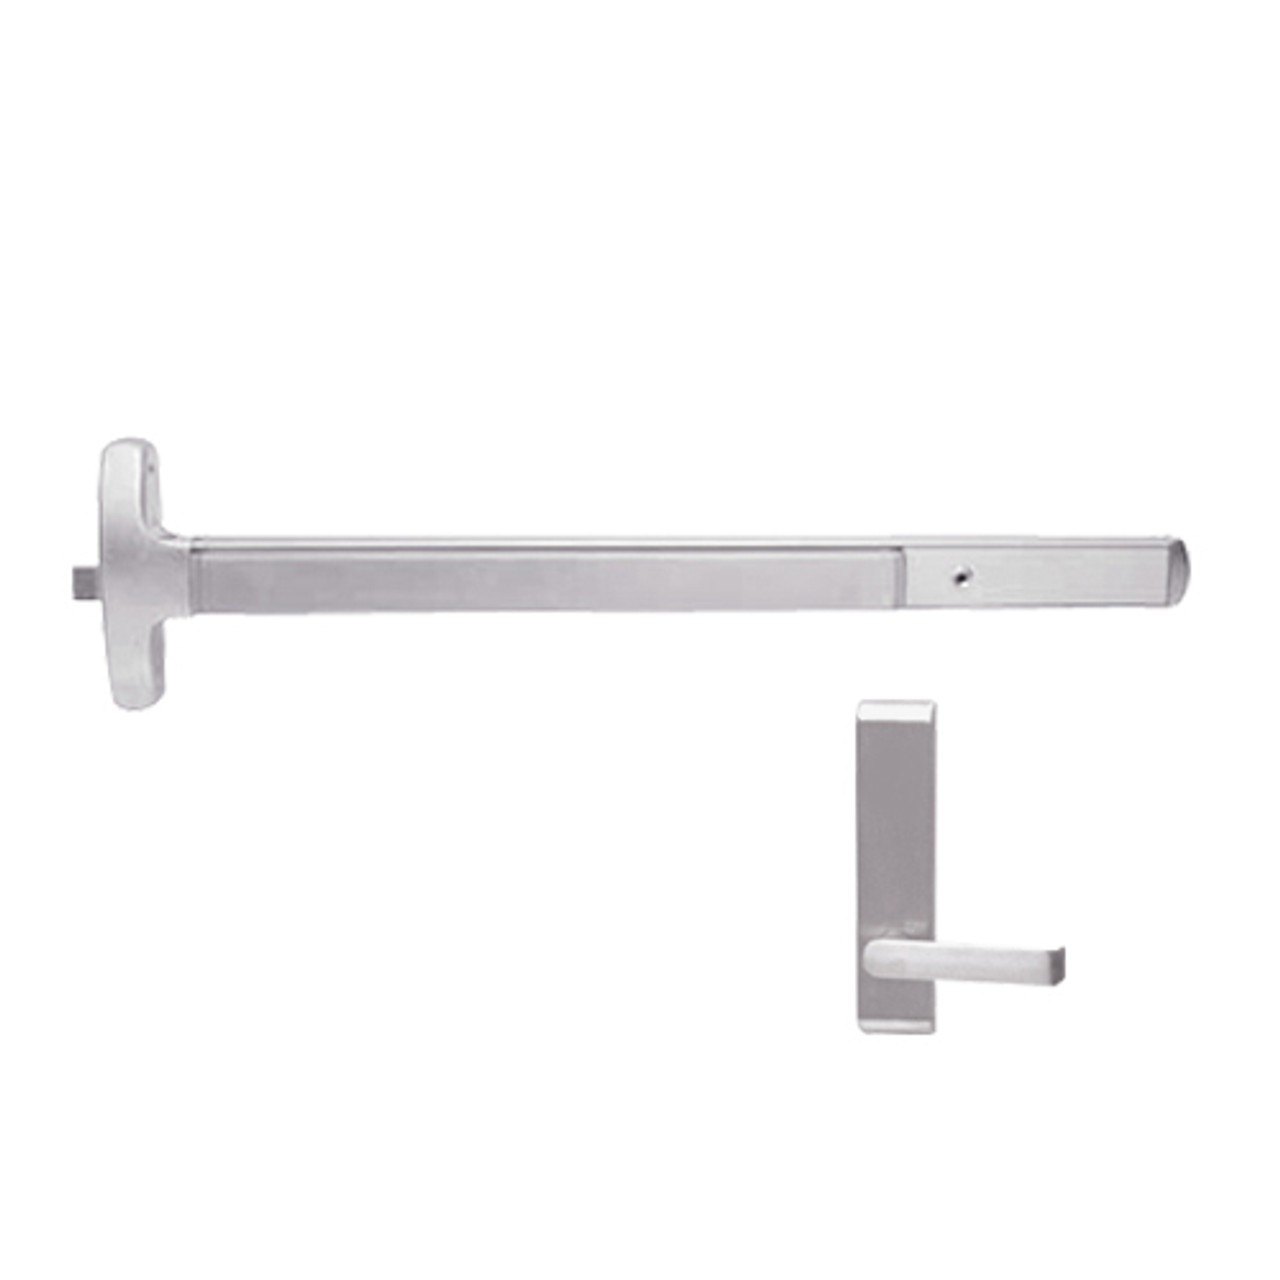 24-R-L-BE-DANE-US32-4-RHR Falcon Exit Device in Polished Stainless Steel